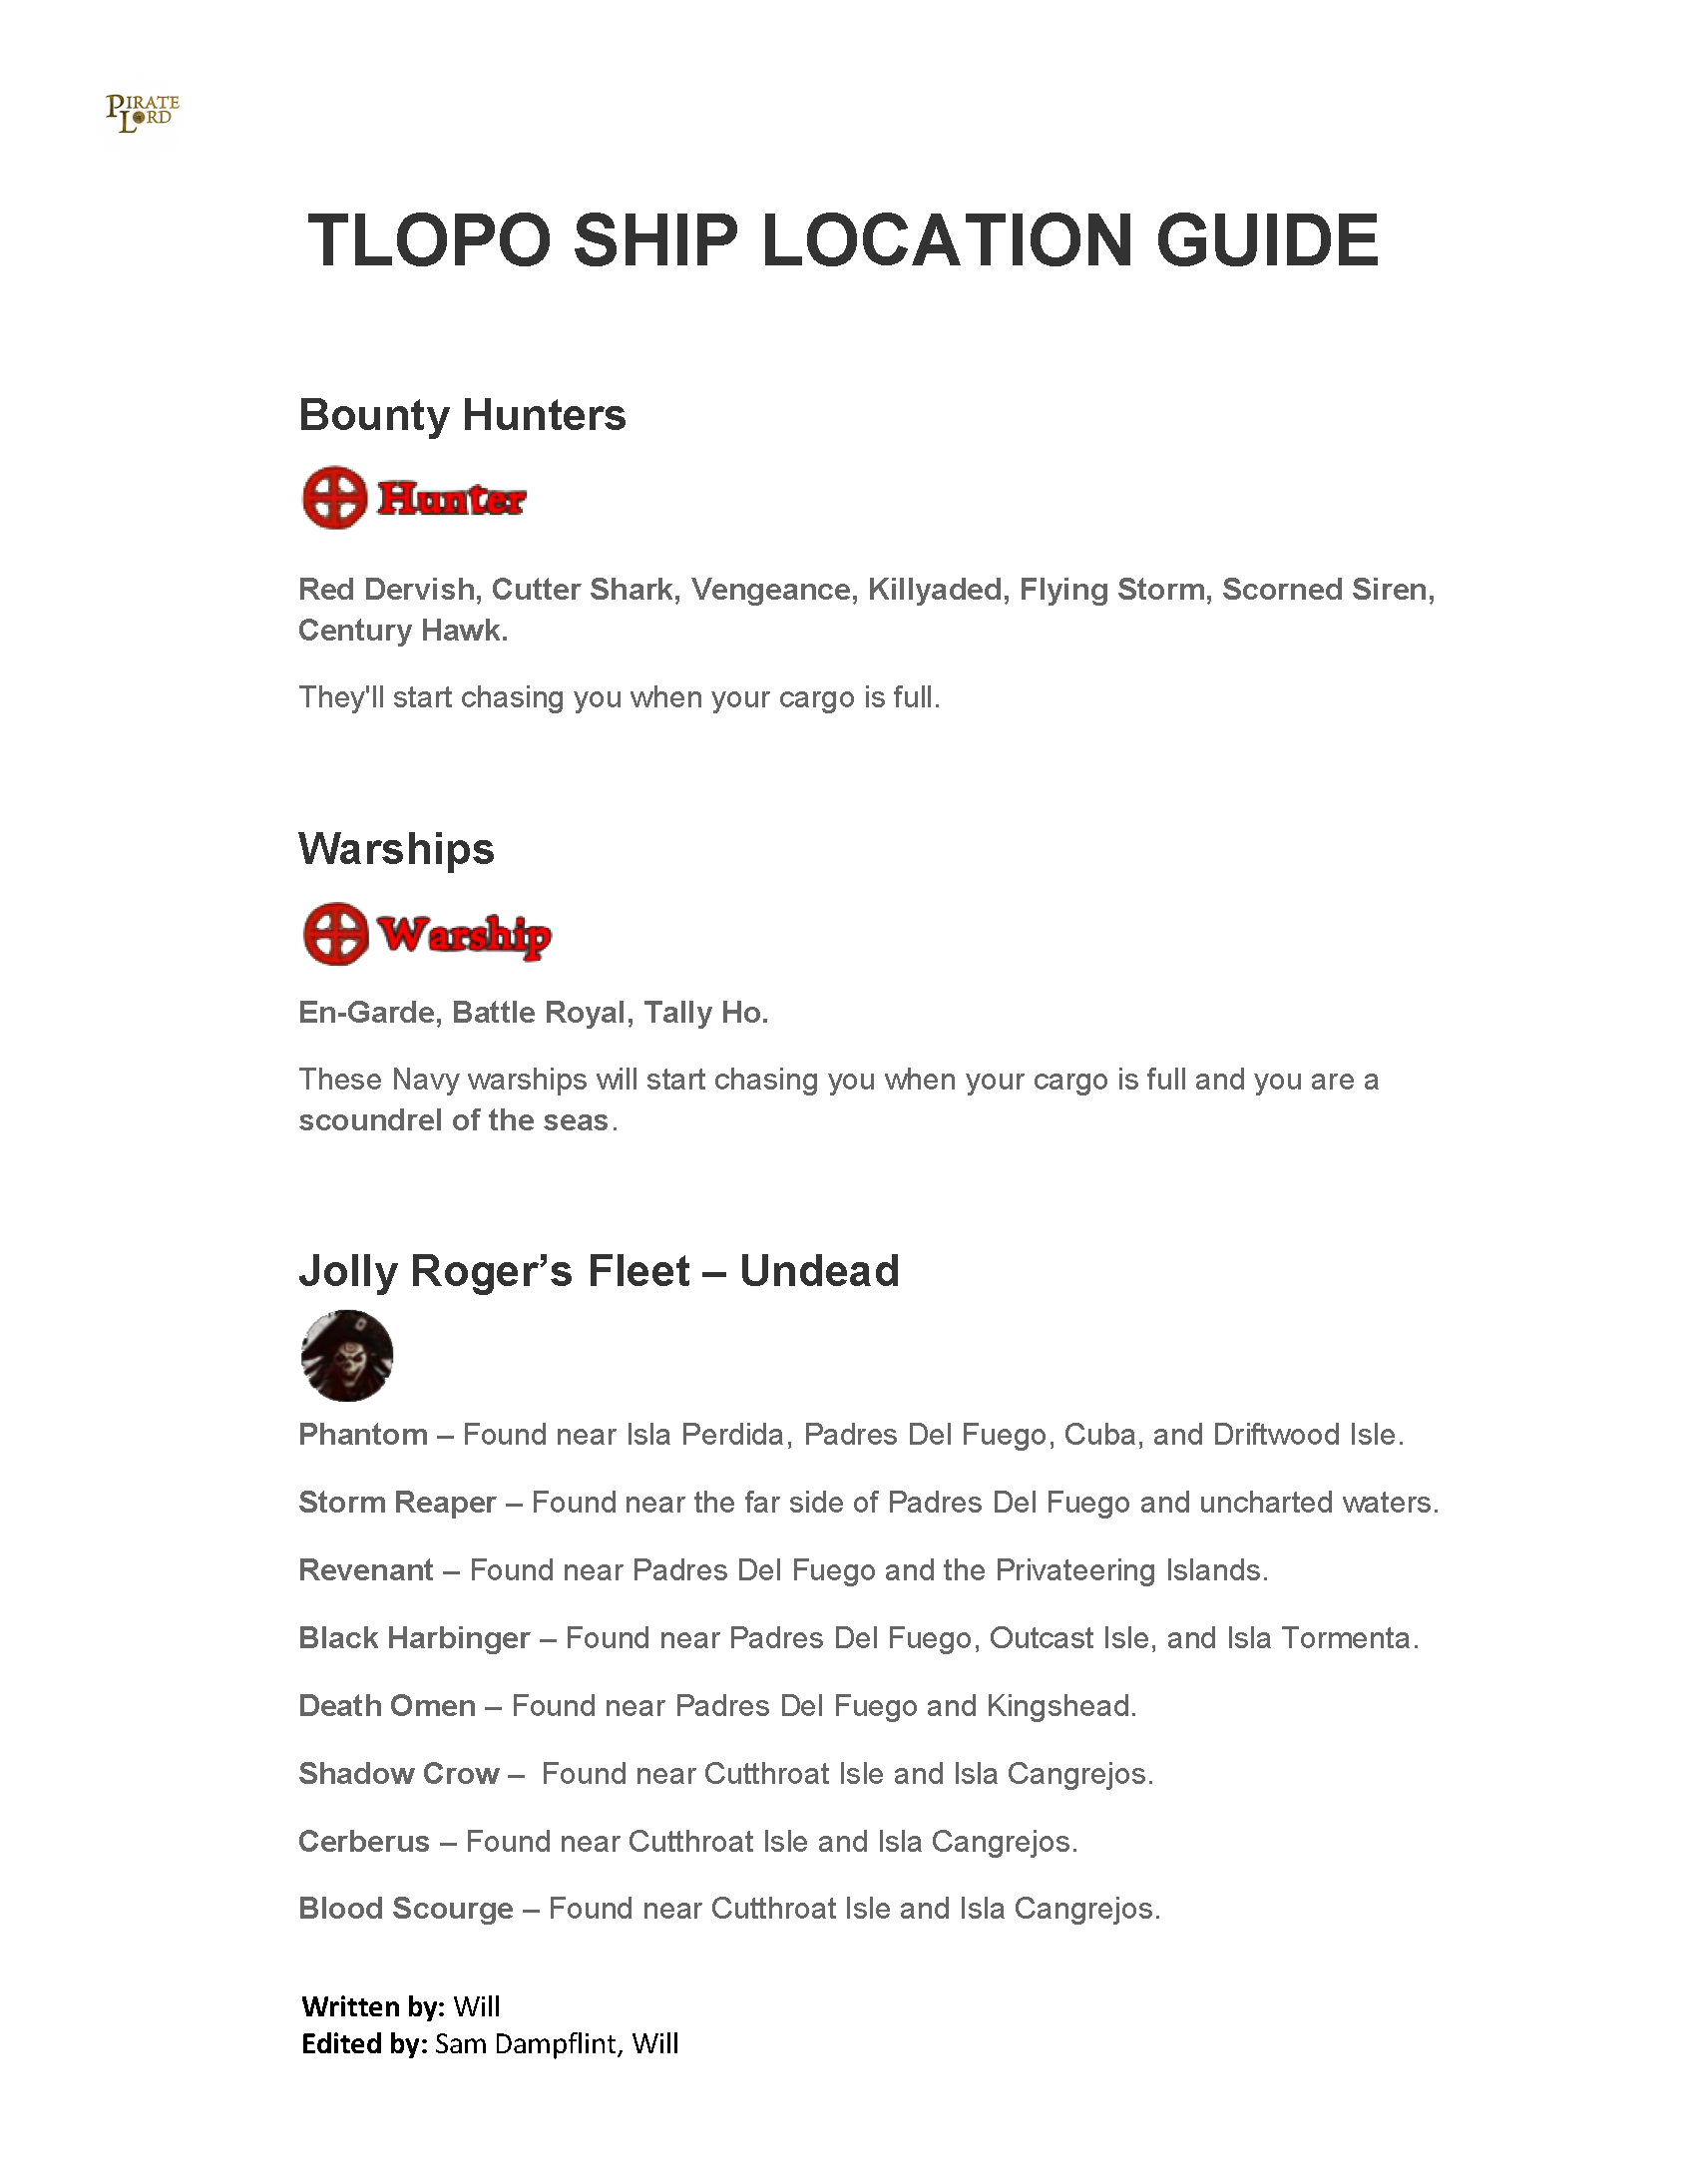 Enemy ship location guide_Page_3.png